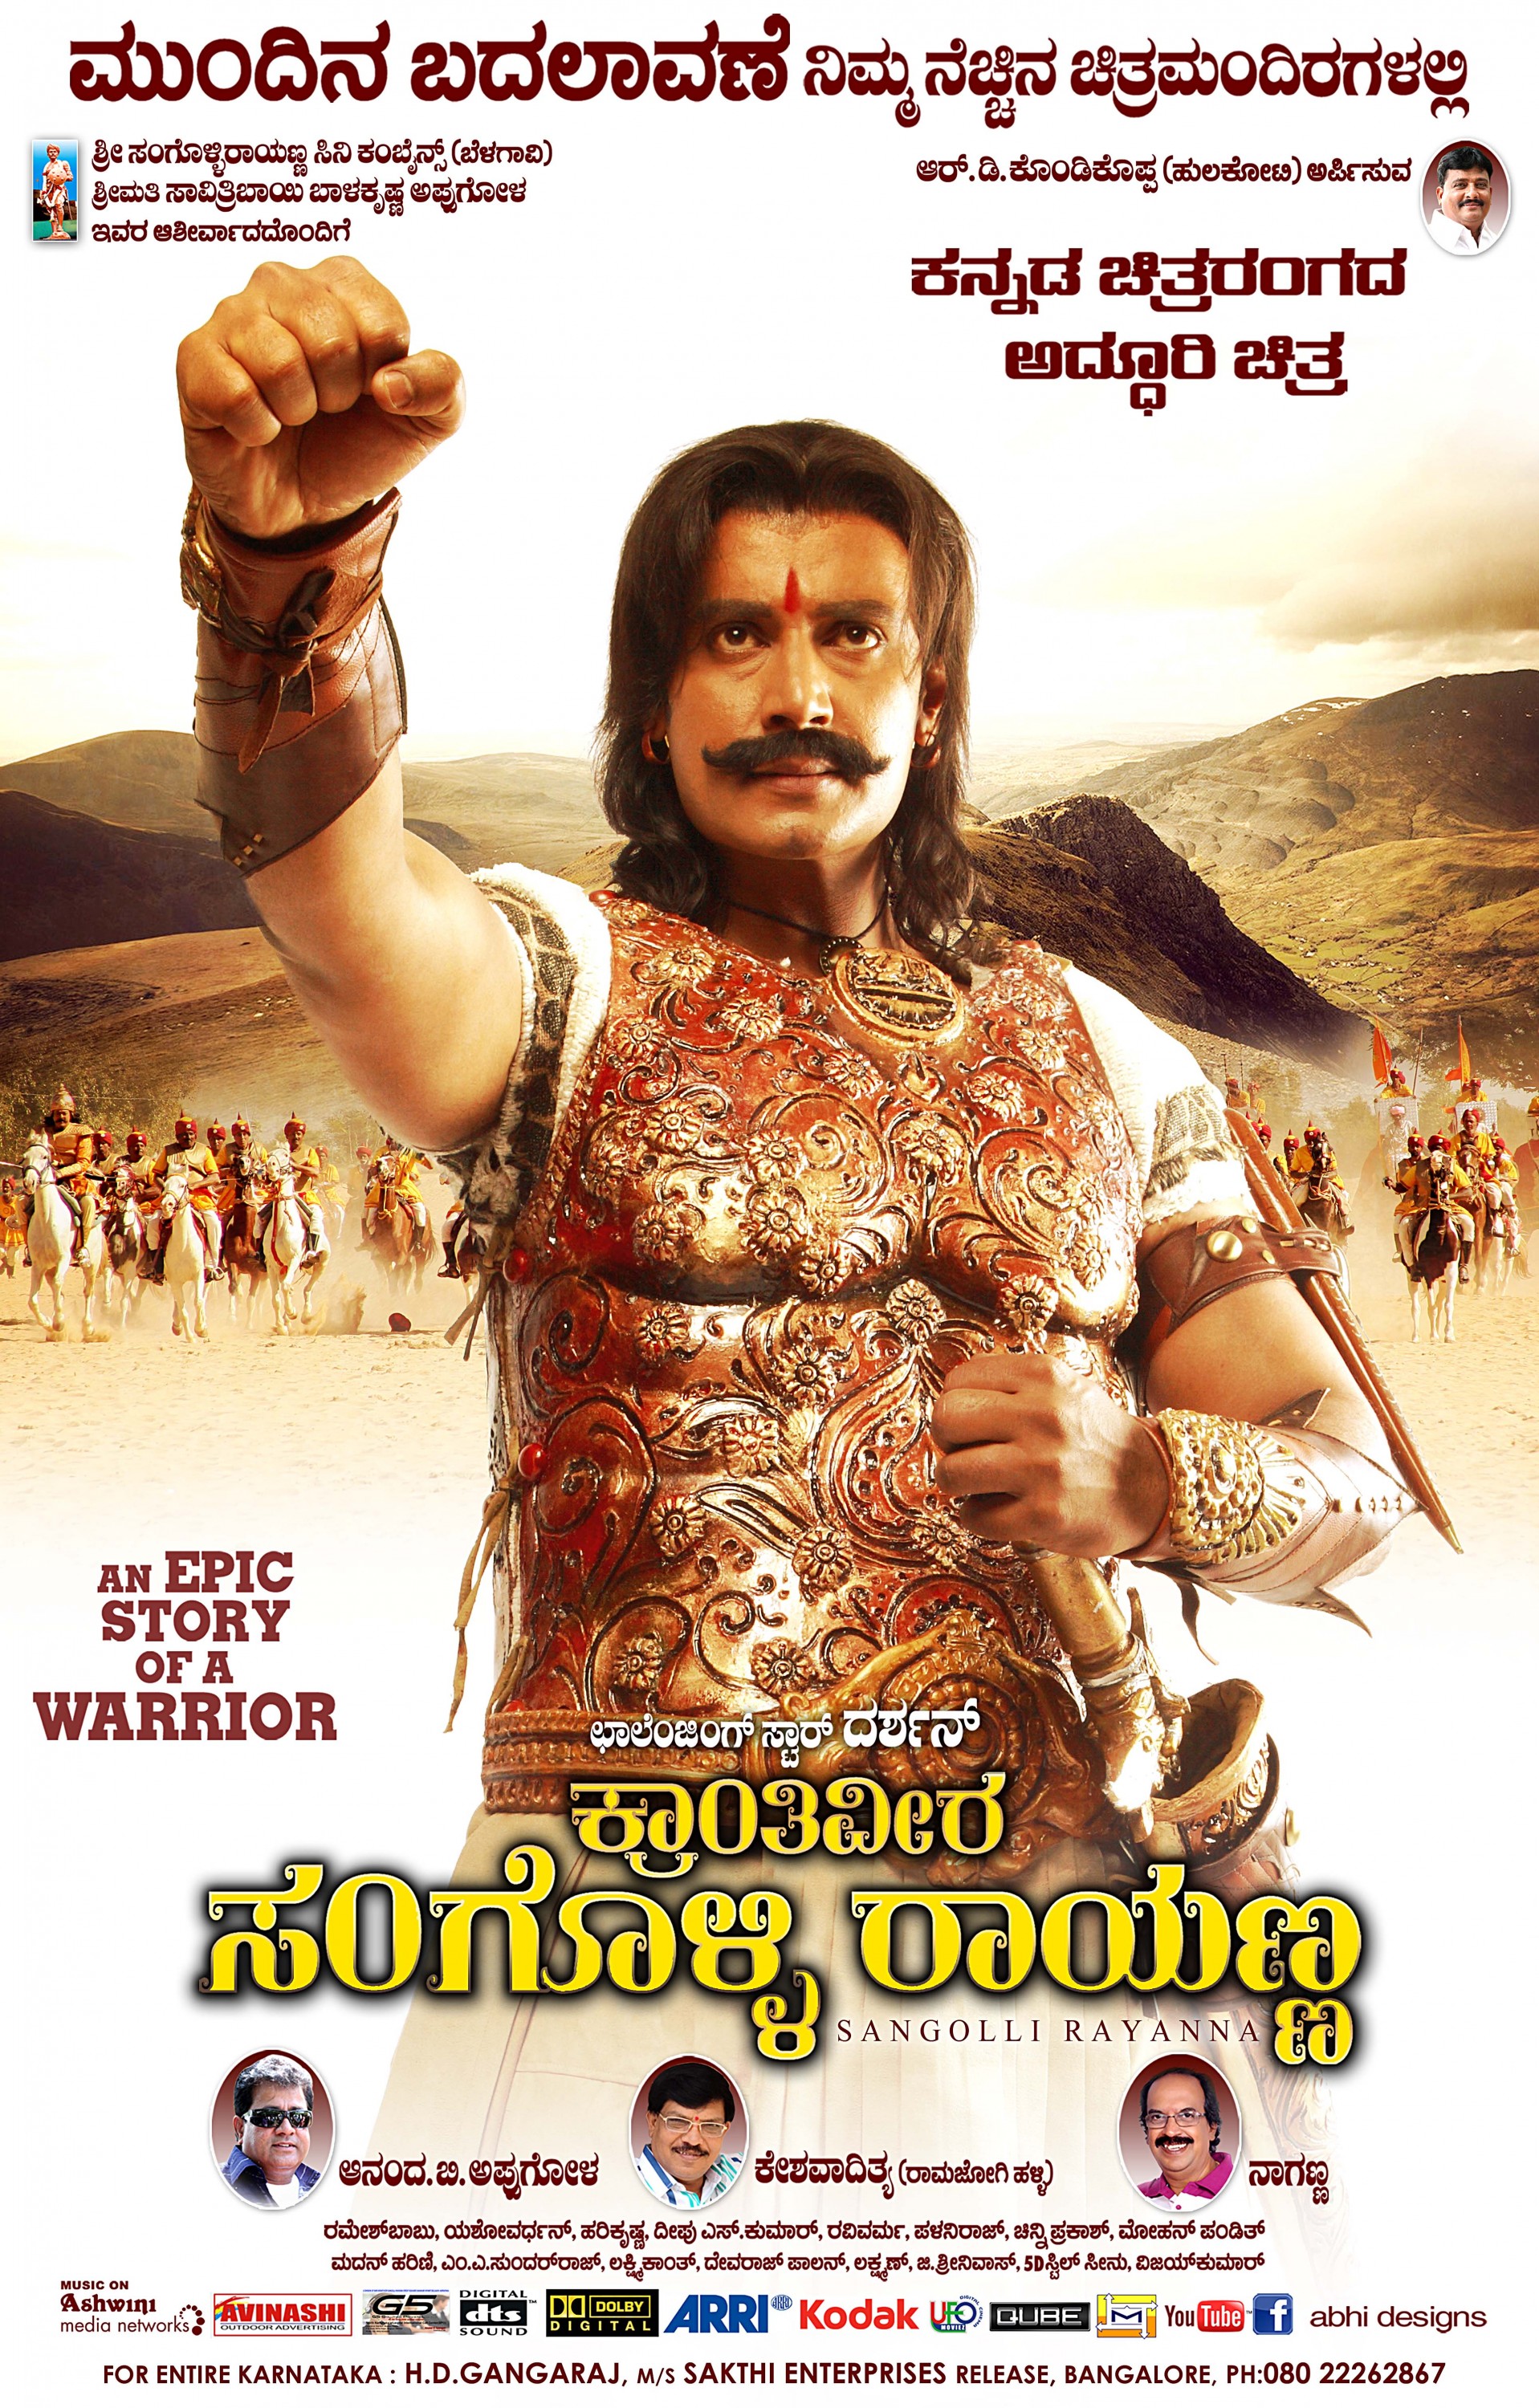 Mega Sized Movie Poster Image for Sangolli Rayanna (#47 of 79)